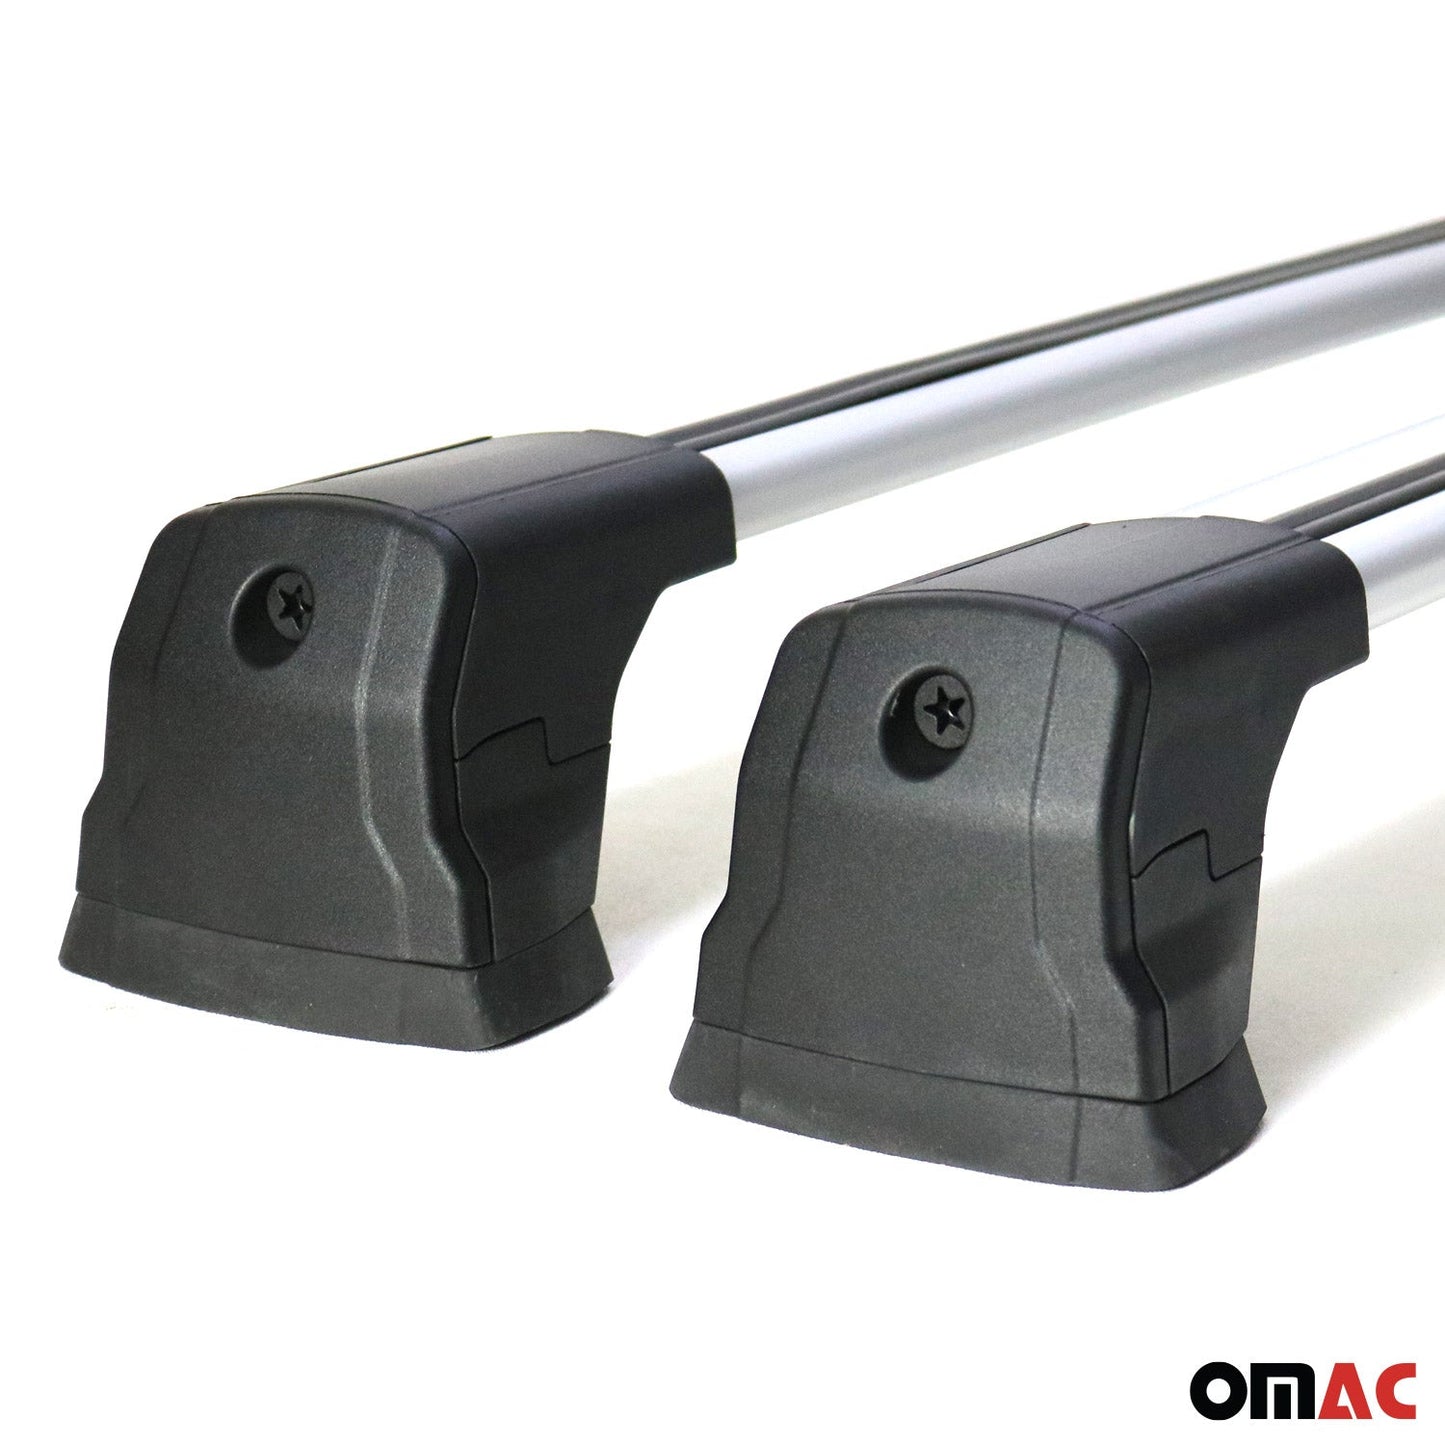 OMAC Fix Points Roof Racks Cross Bar Carrier for Mazda CX-7 2007-2012 Alu Silver 2x '4623913